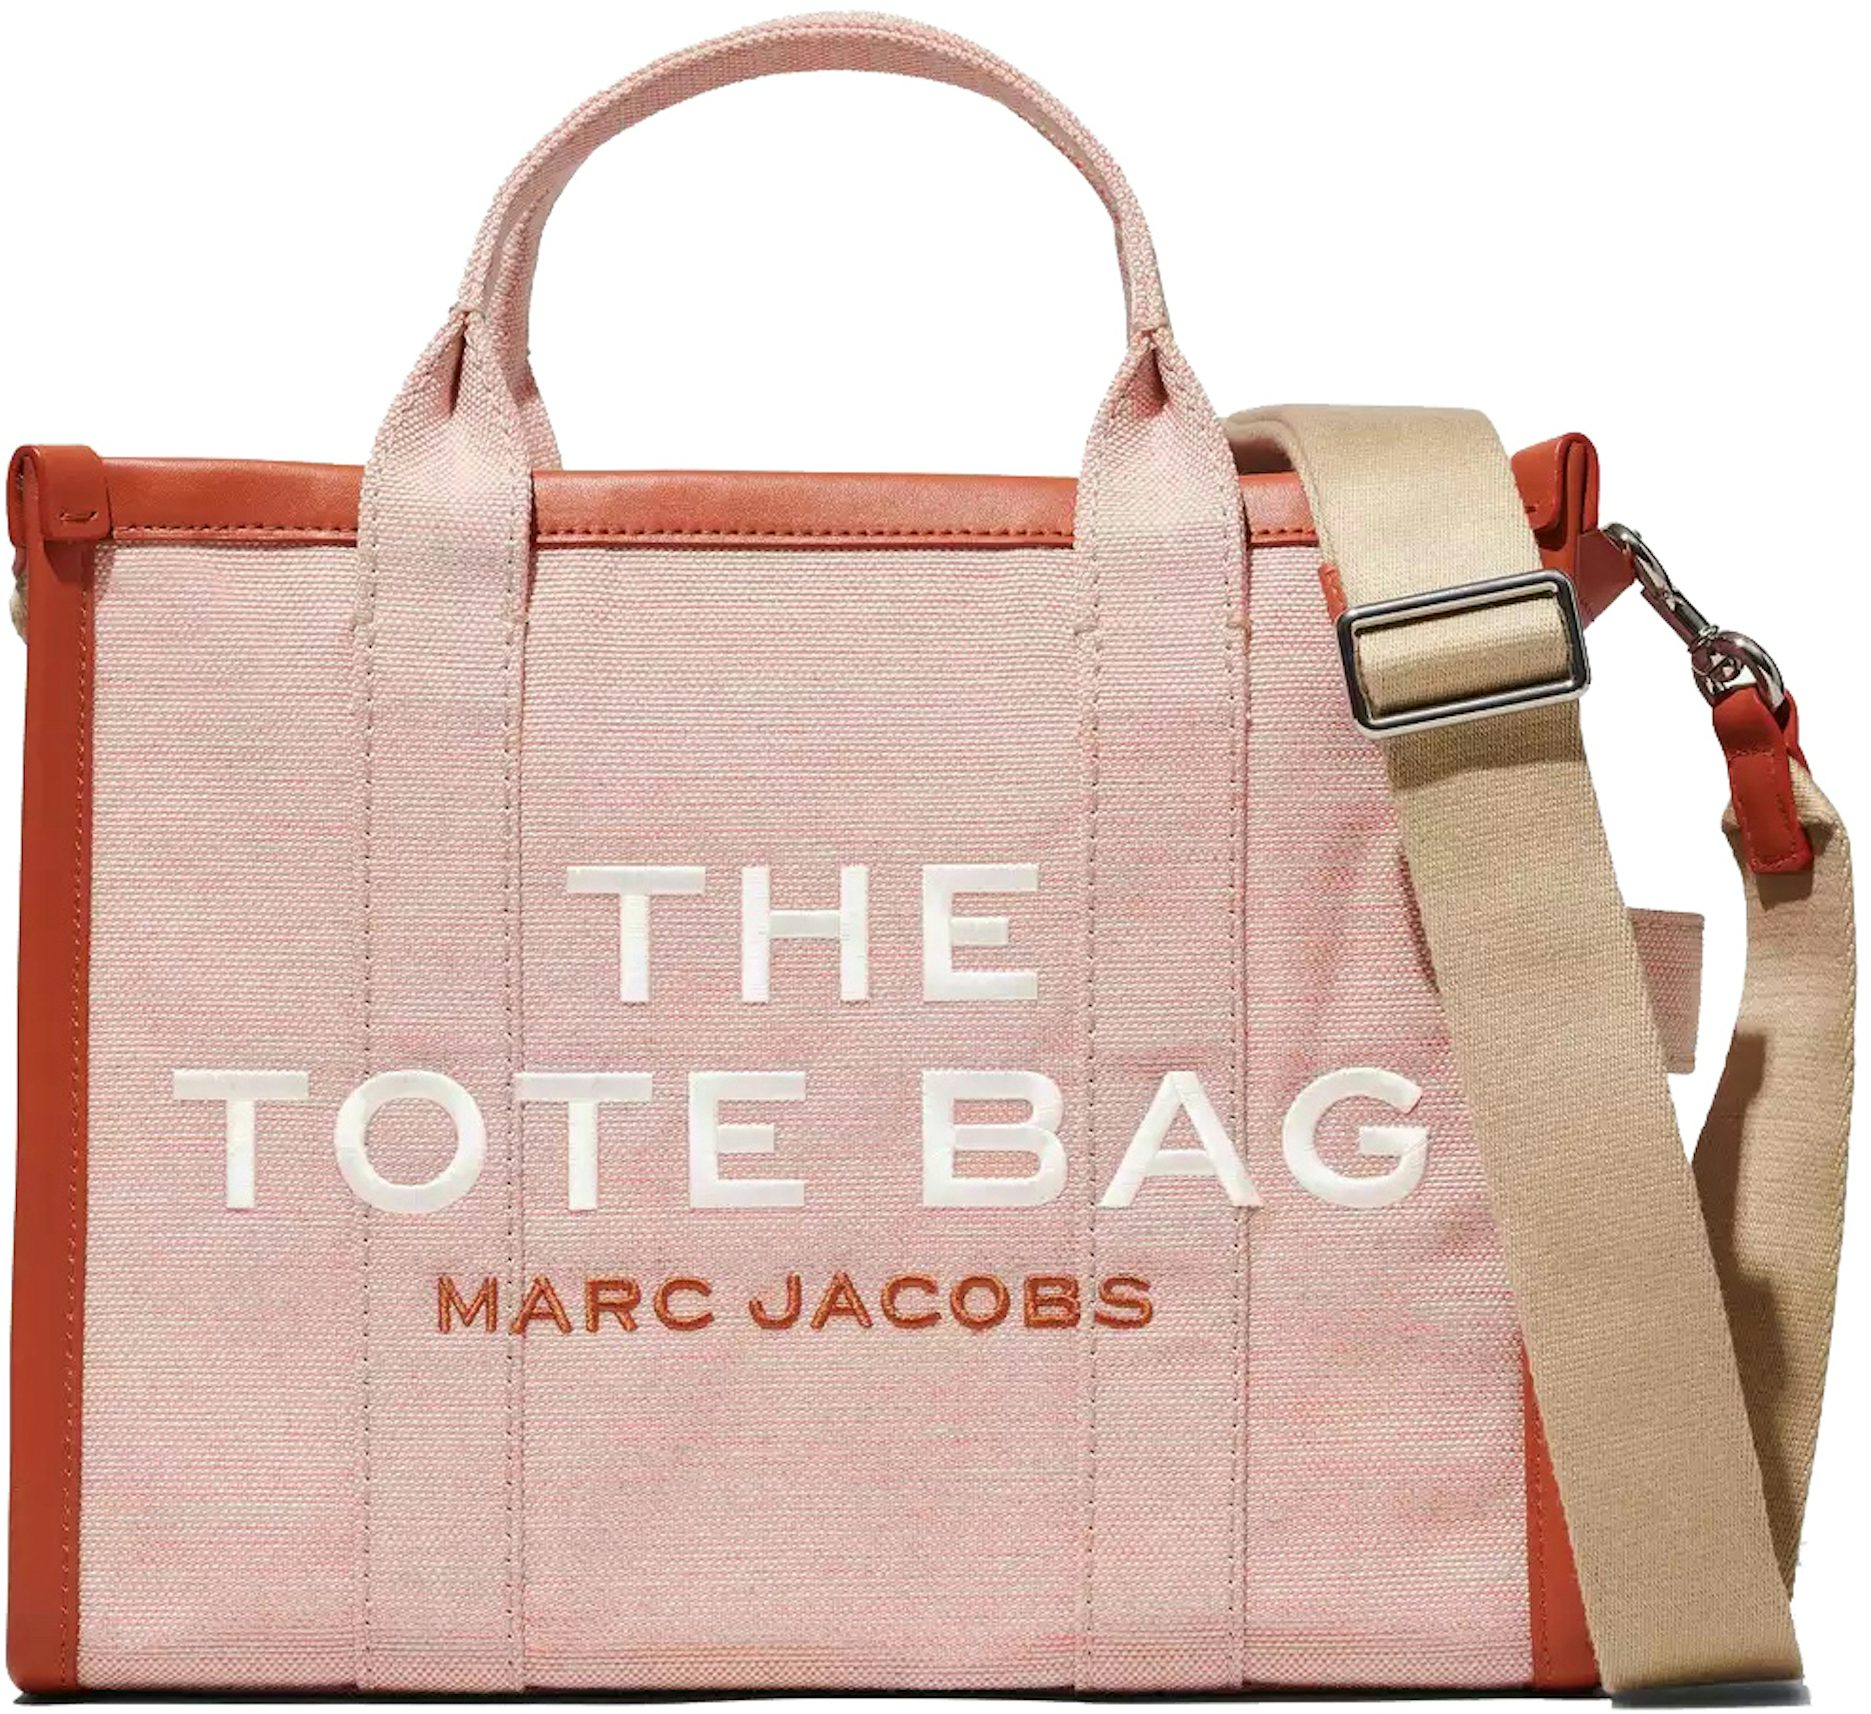 Marc Jacobs The Leather Tote Bag Medium Rose Dust